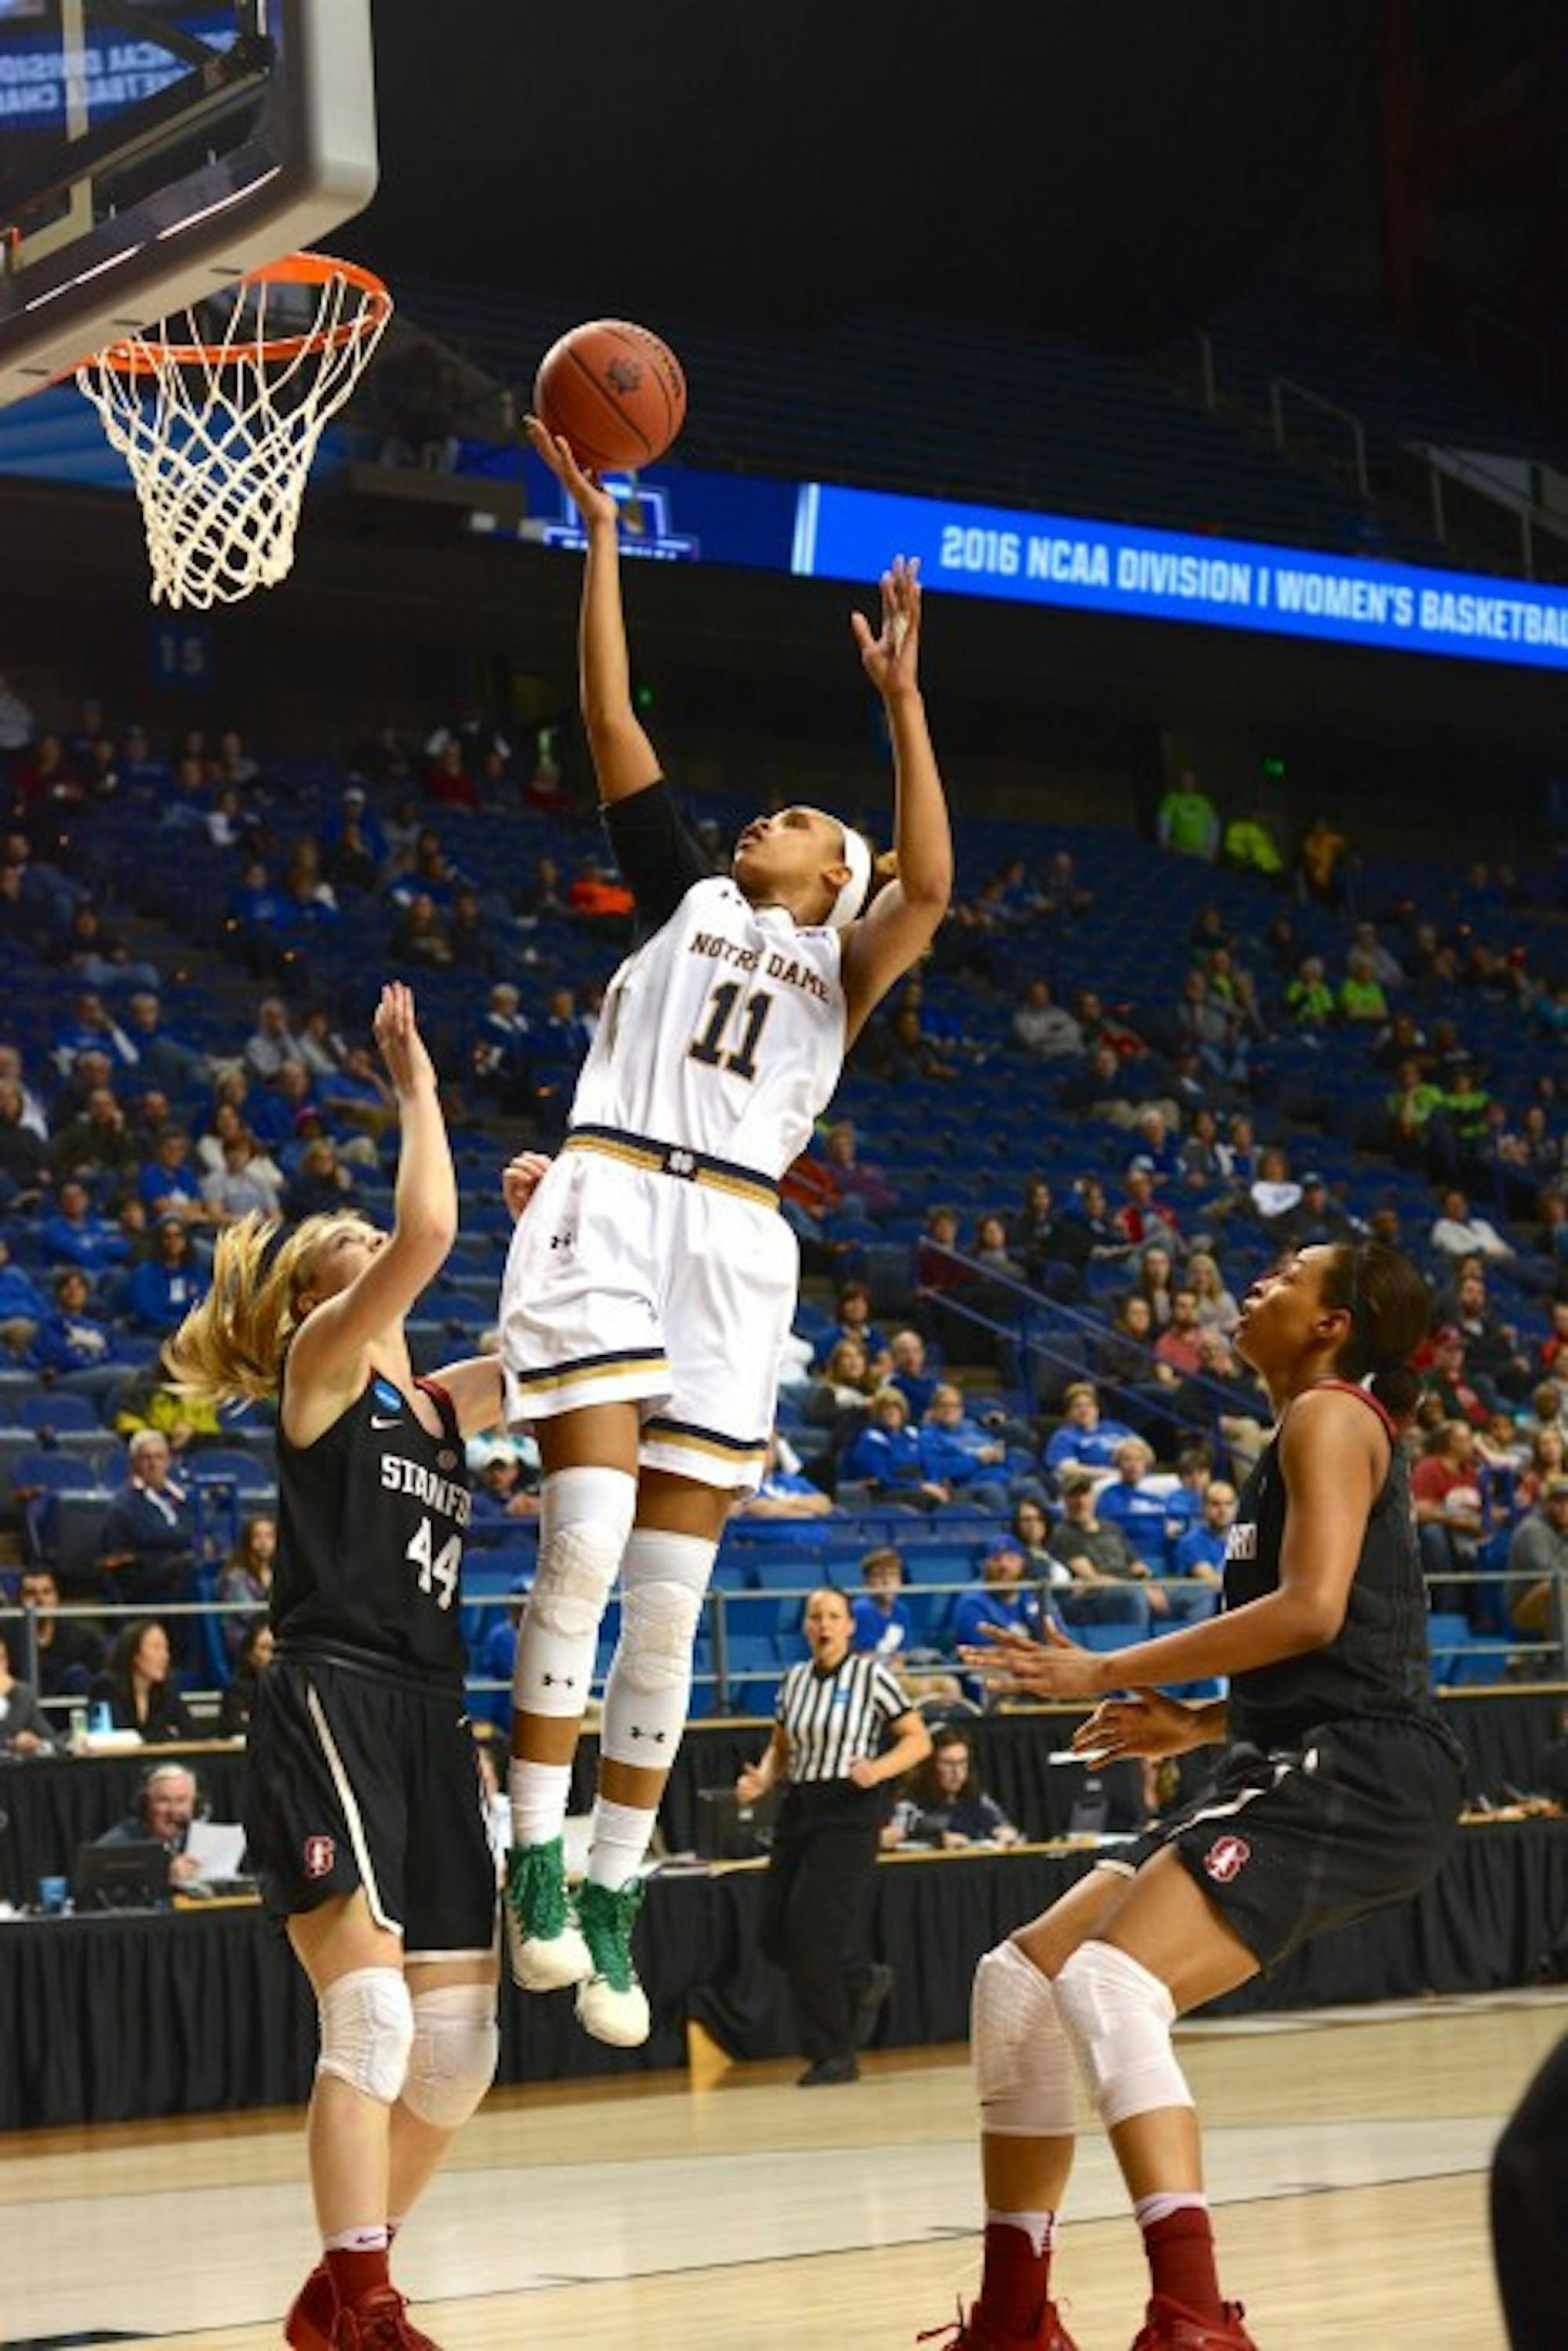 Irish sophomore forward Brianna Turner shoots the ball during Notre Dame's 90-84 loss to Stanford in the Sweet 16 on Friday night in Lexington, Kentucky.